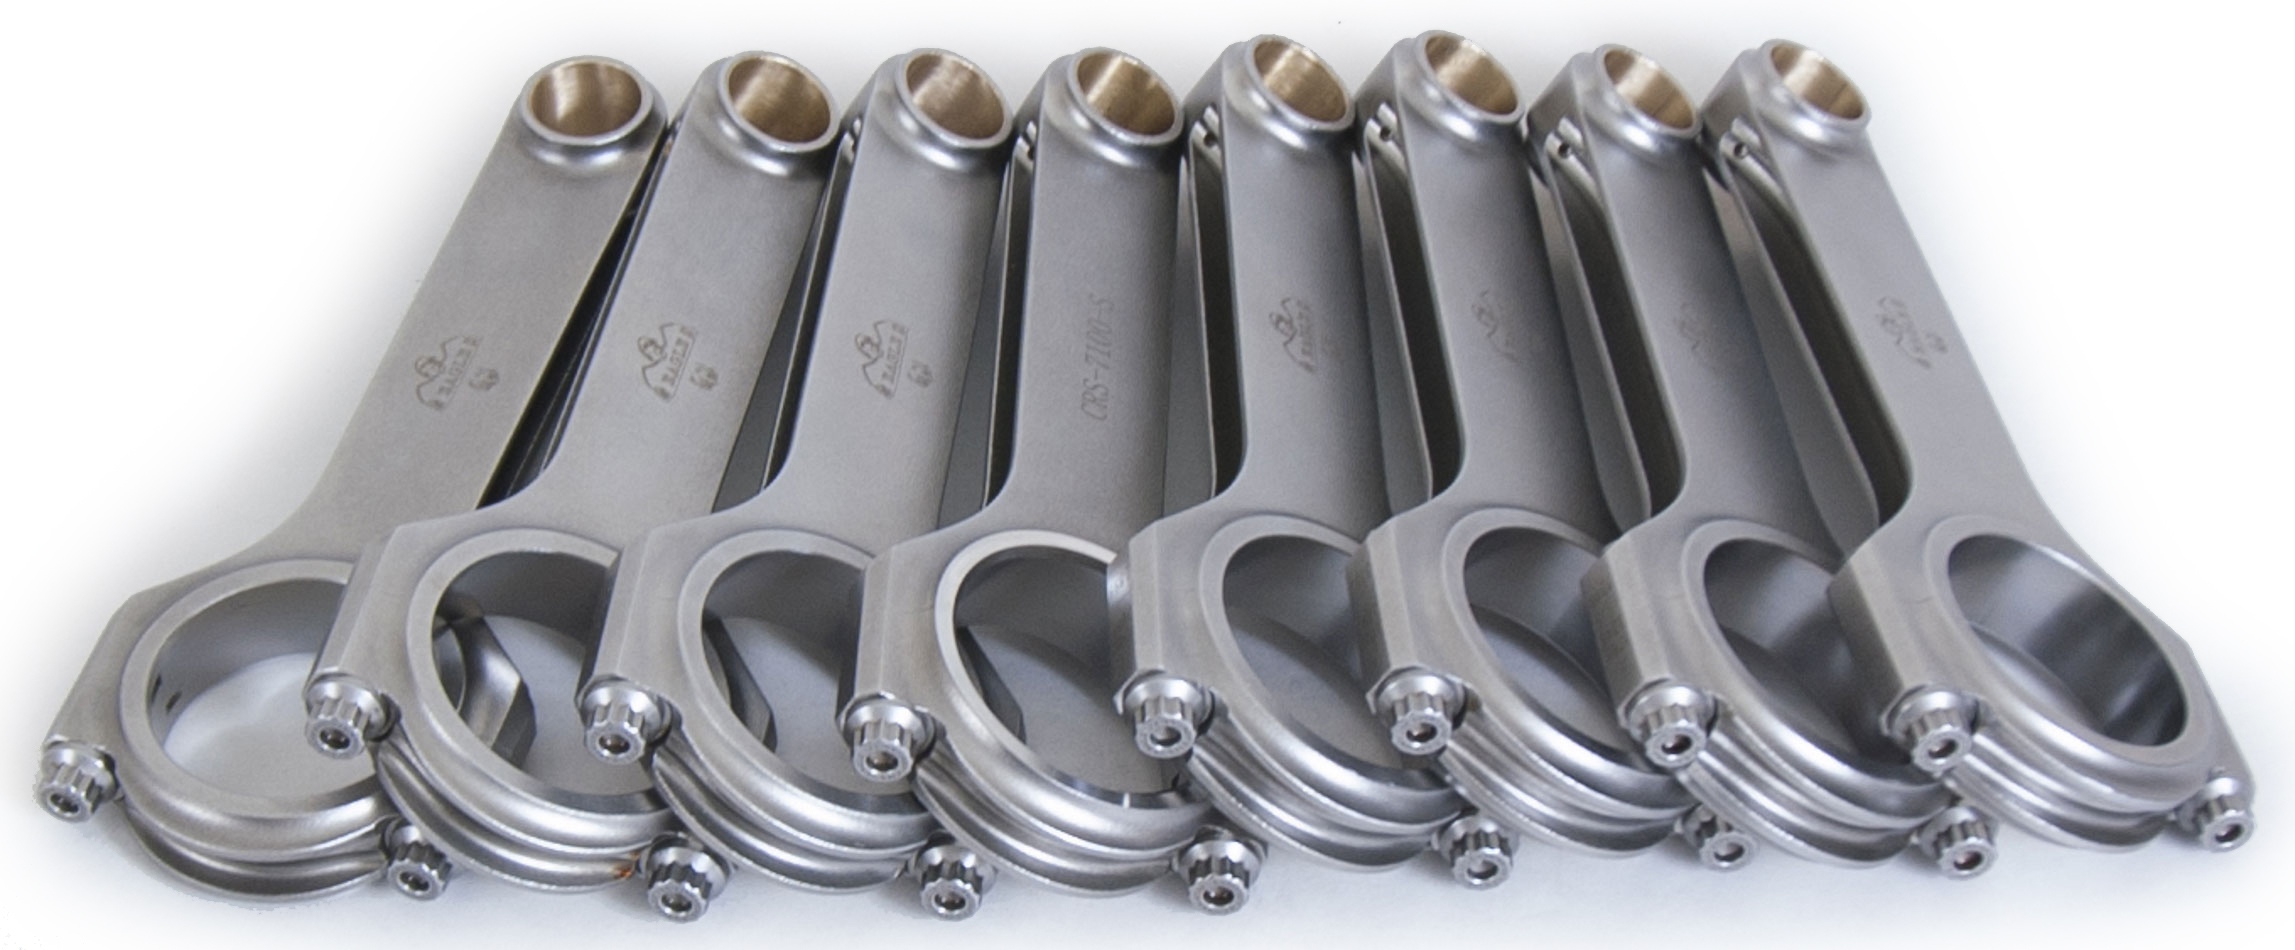 Eagle CRS71003D - Connecting Rod, H Beam, 7.100 in Long, Bushed, 7/16 in Cap Screws, Forged Steel, Big Block Chevy / Oldsmobile V8, Set of 8